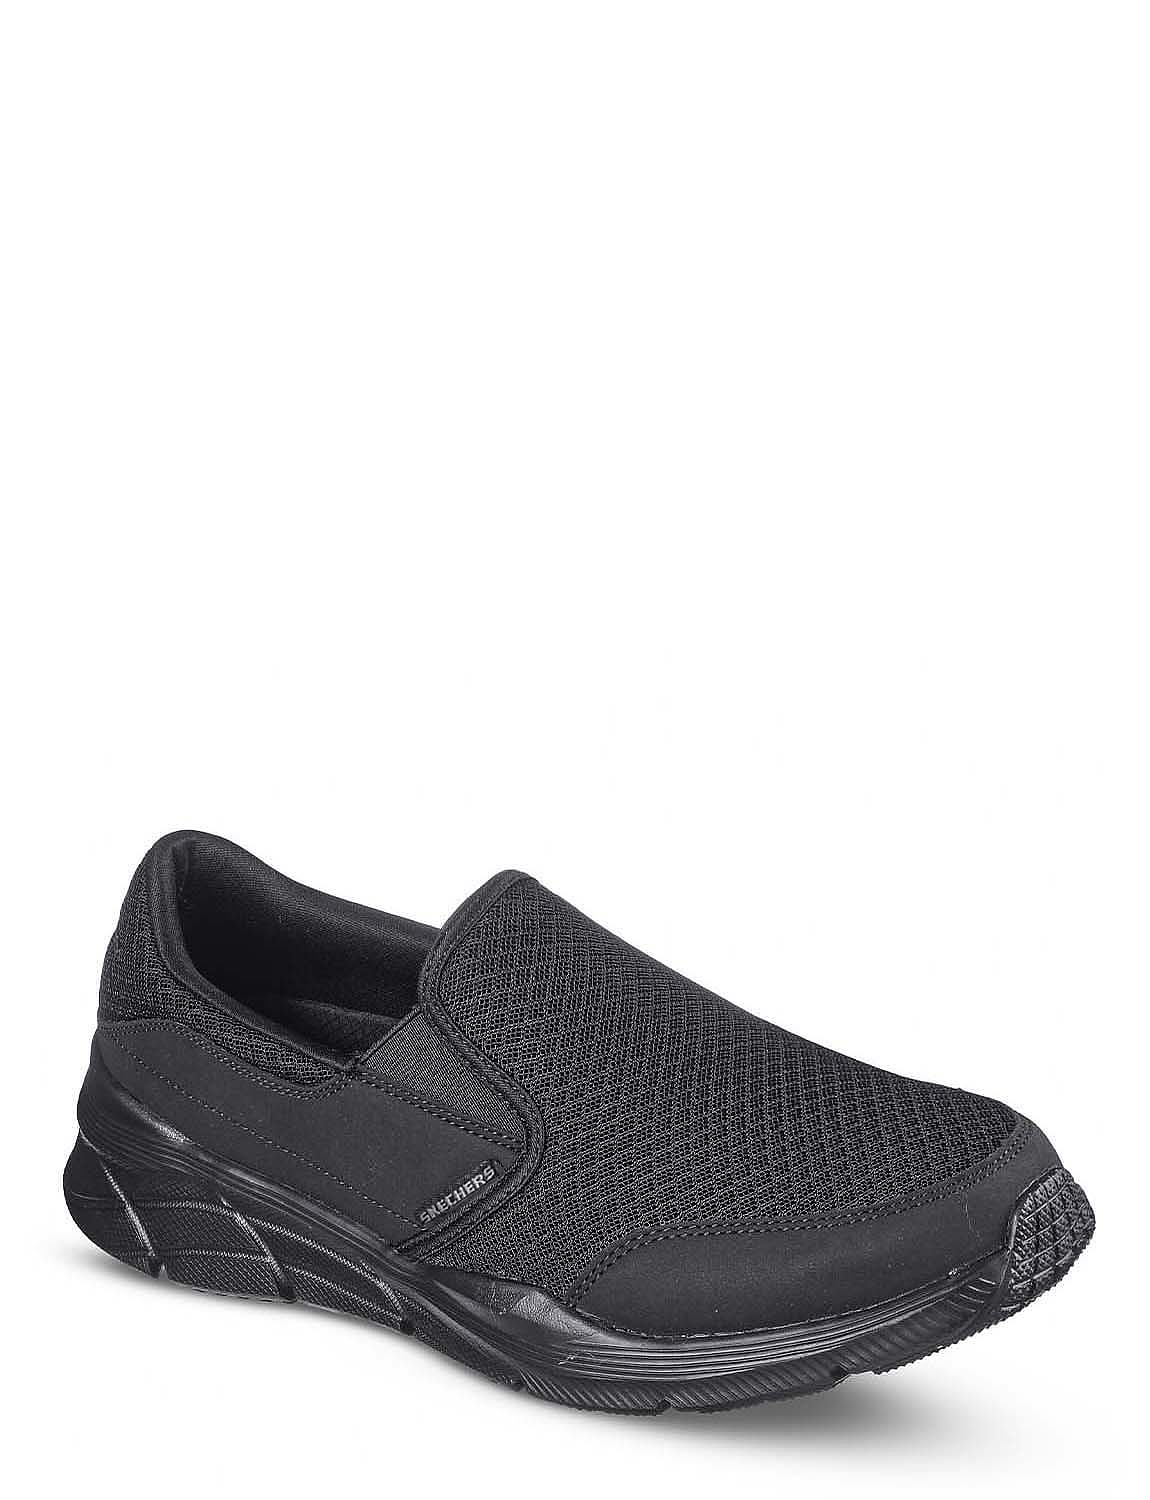 Skechers Equalizer 4.0 Wide Slip On Trainers |